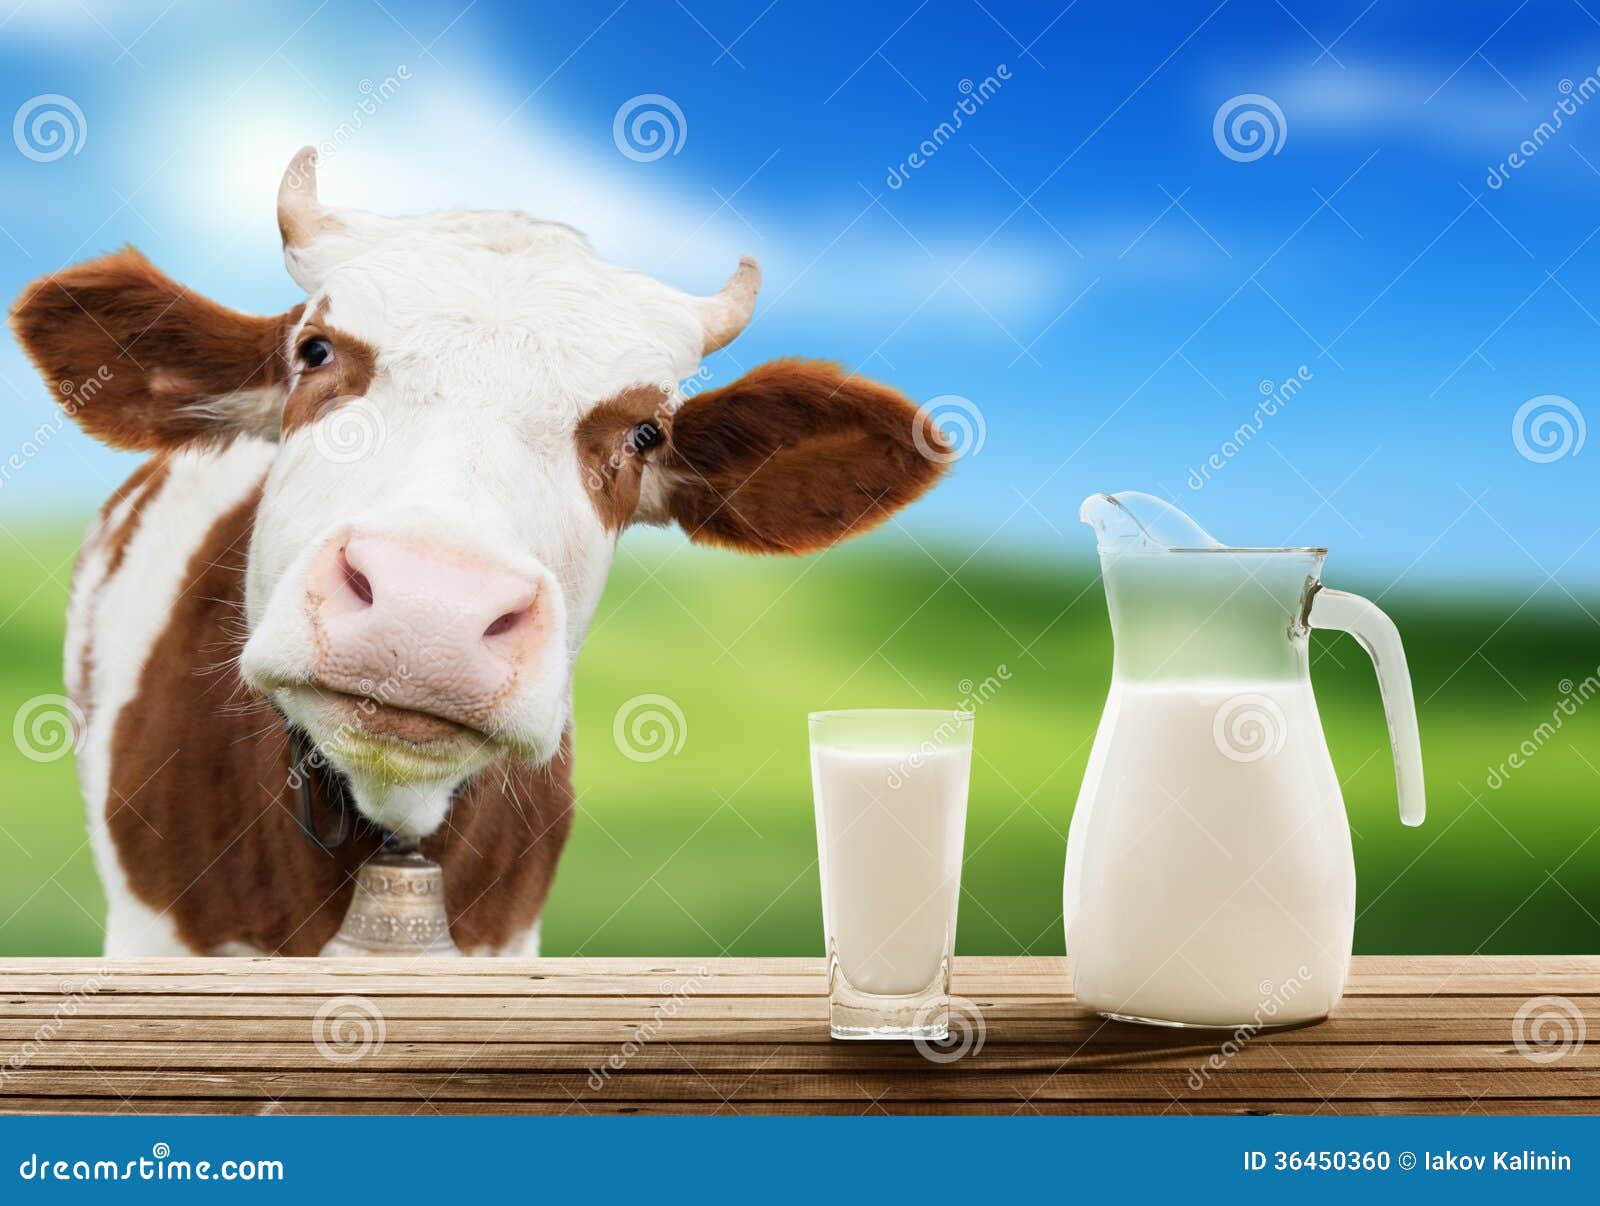 cow and milk